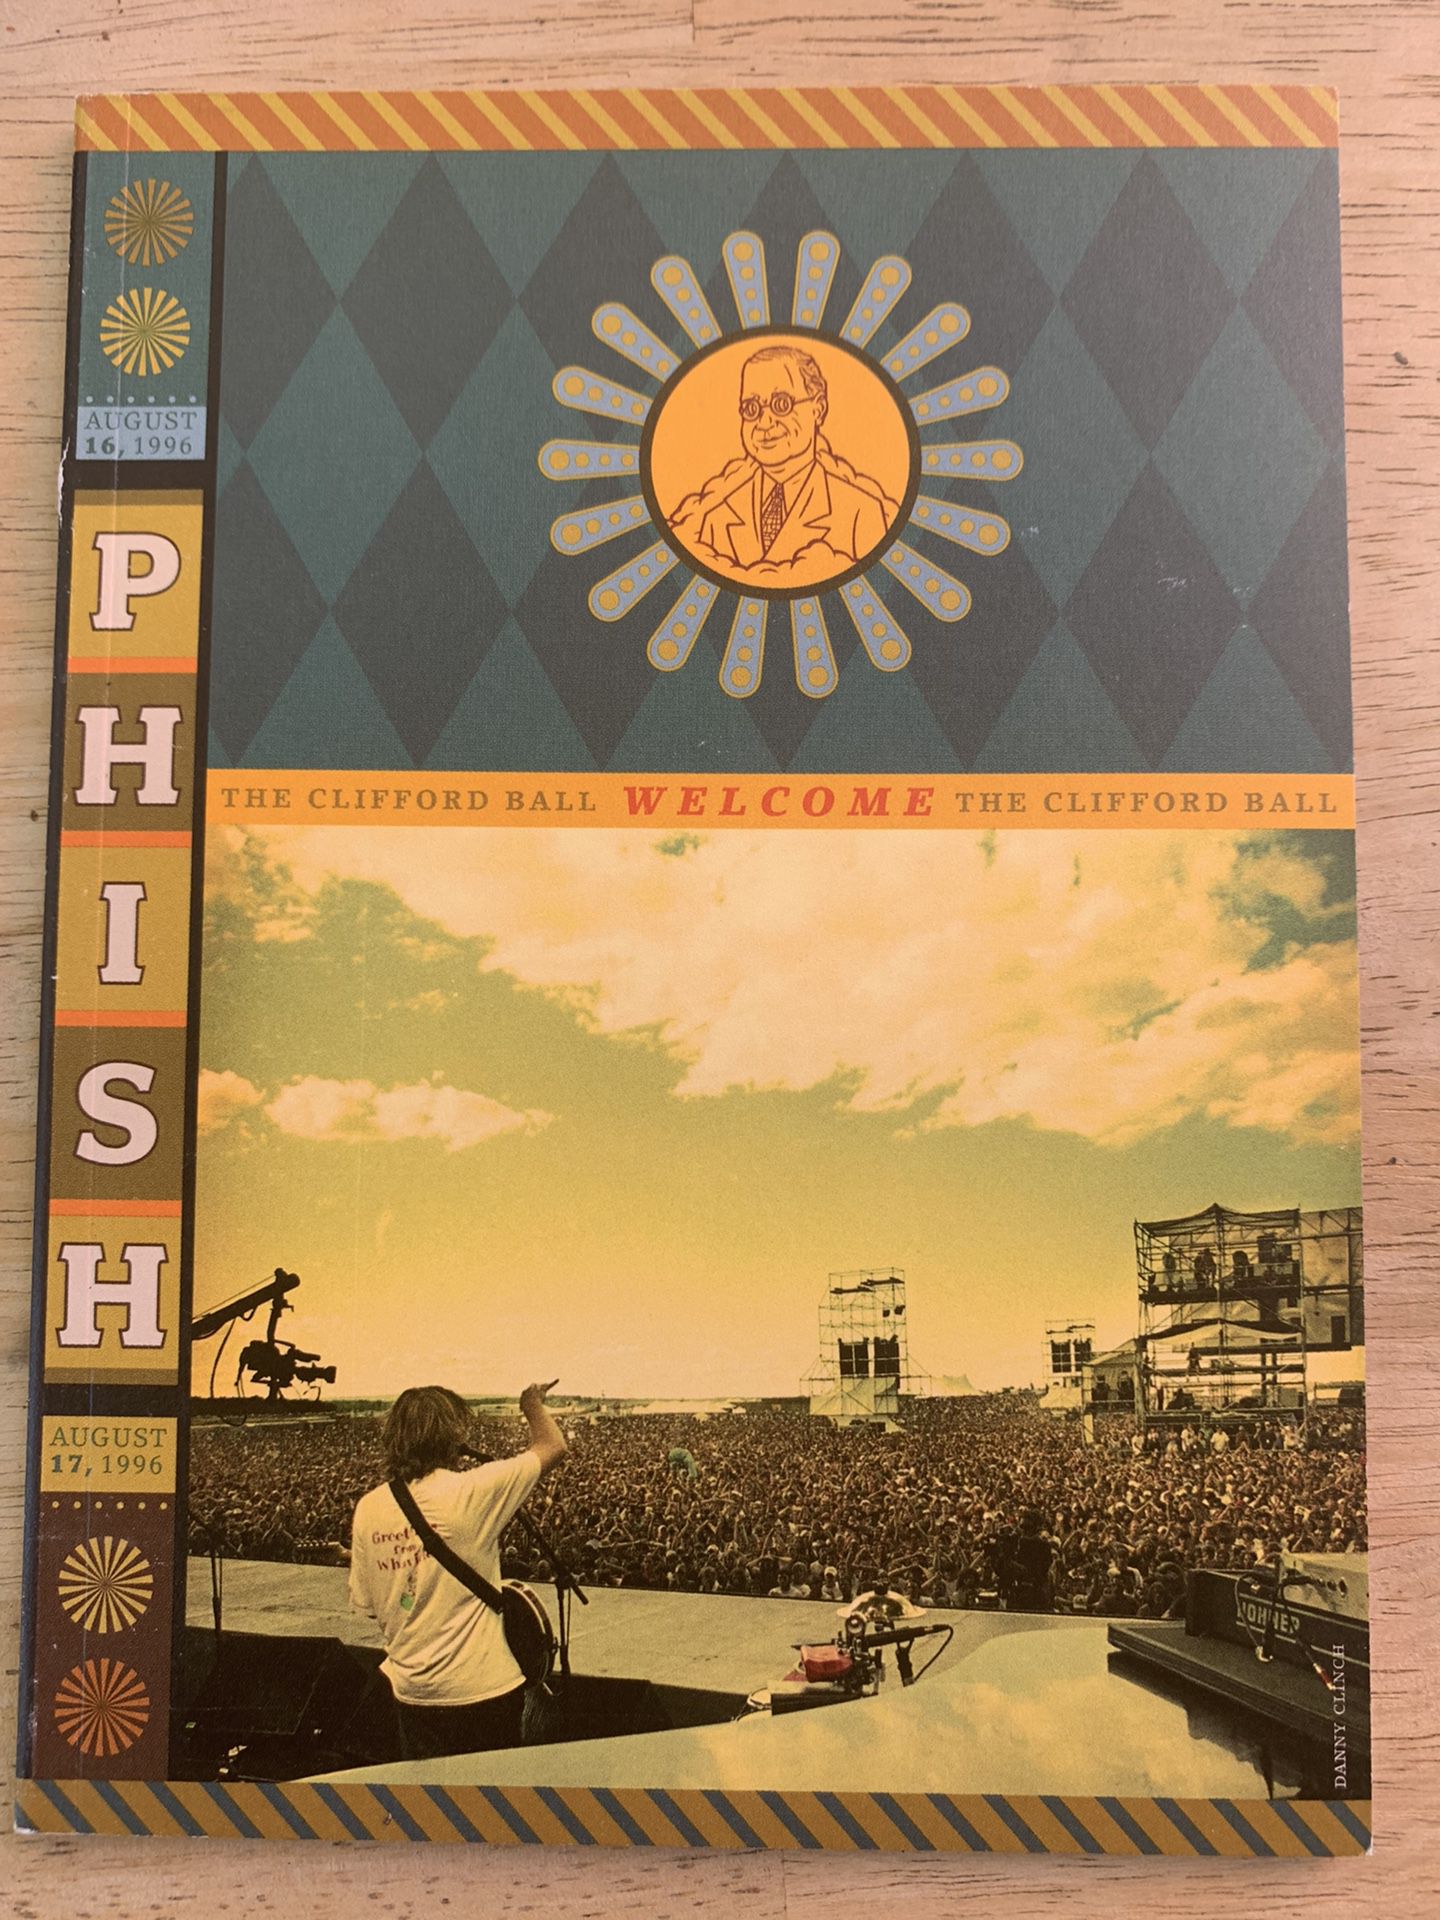 Phish - Clifford Ball August 16 & 17, 1996 - Collectors DVD